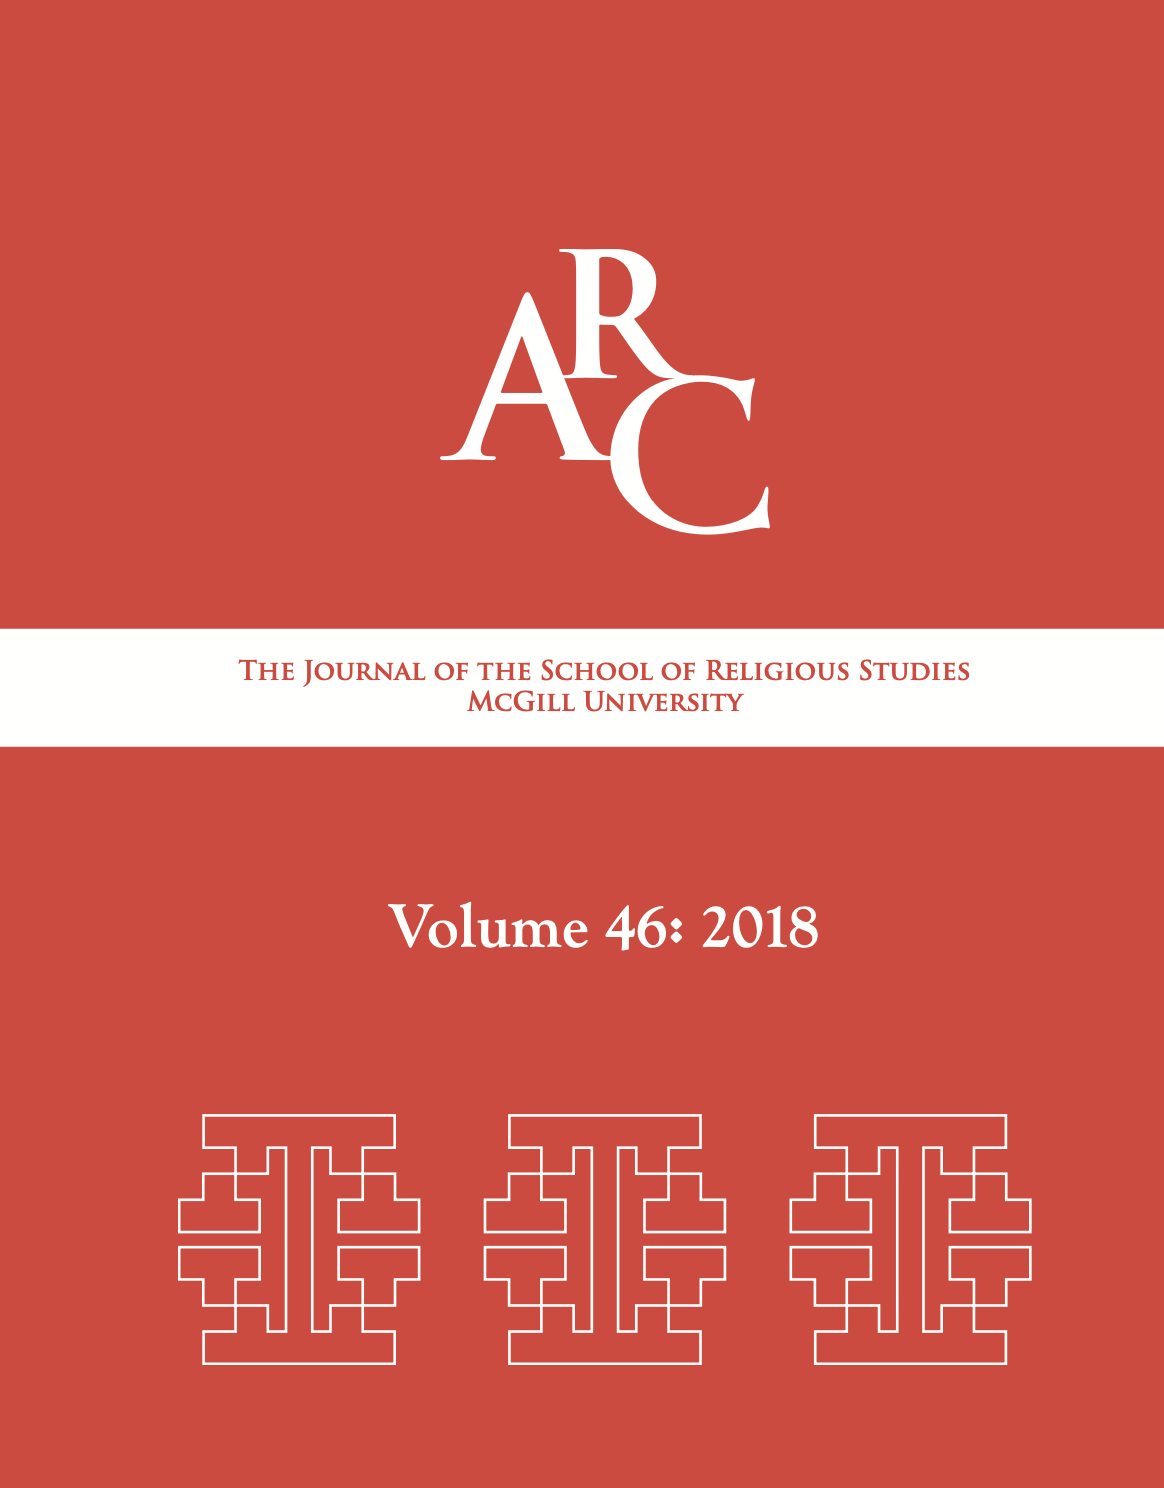 					View Vol. 46 (2018): Arc: The Journal of the School of Religious Studies
				